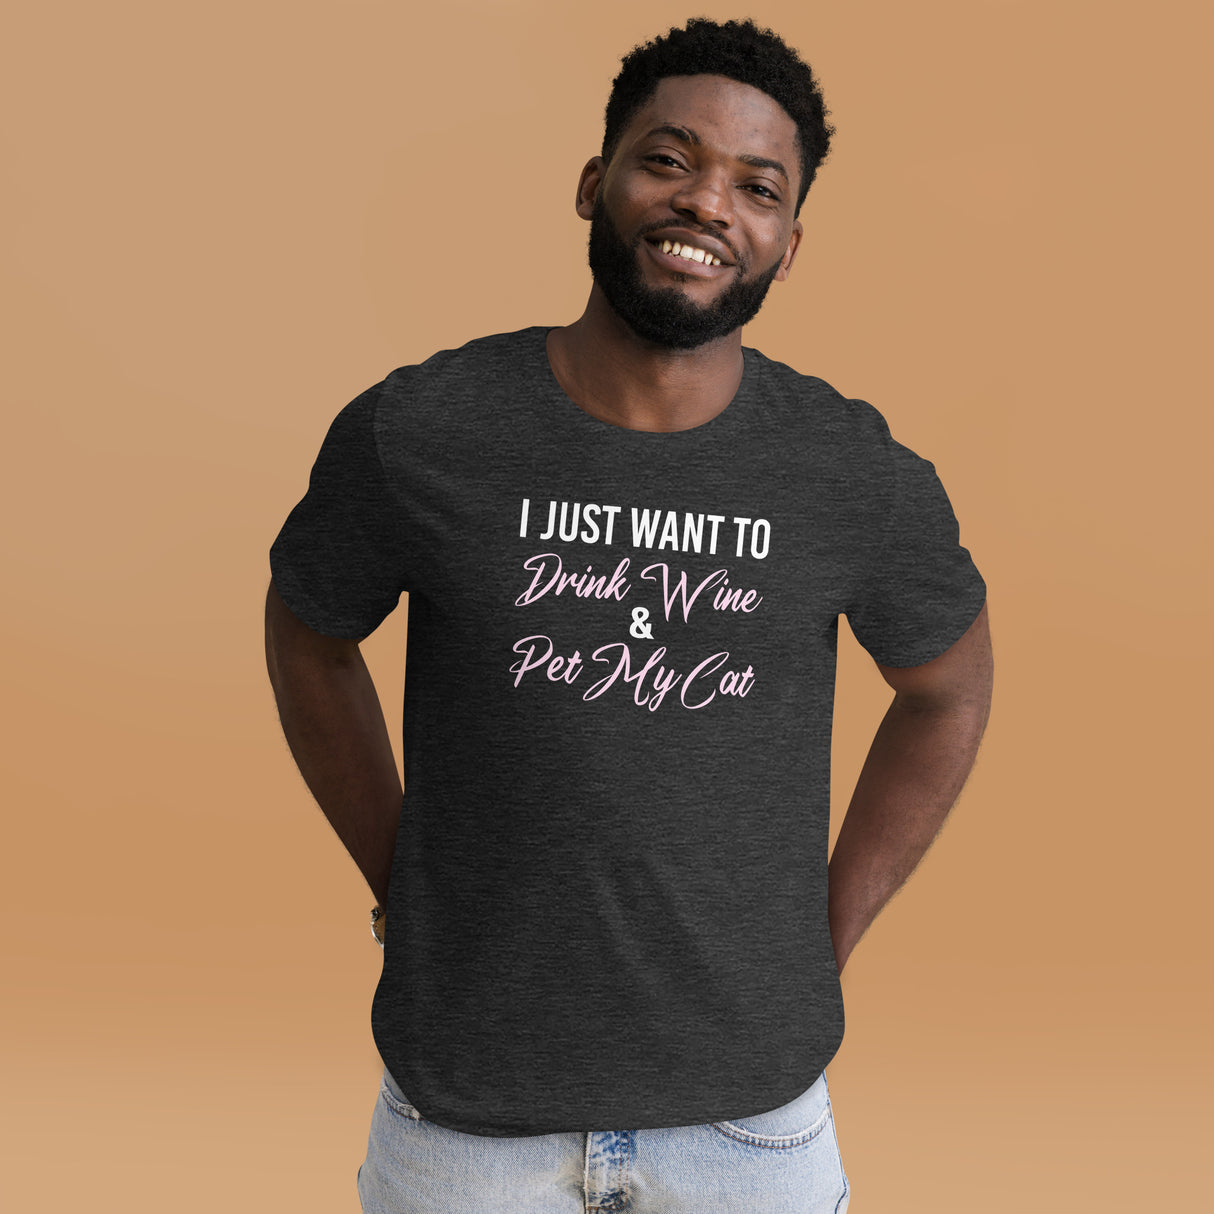 I Just Want To Drink Wine and Pet My Cat Men's Shirt